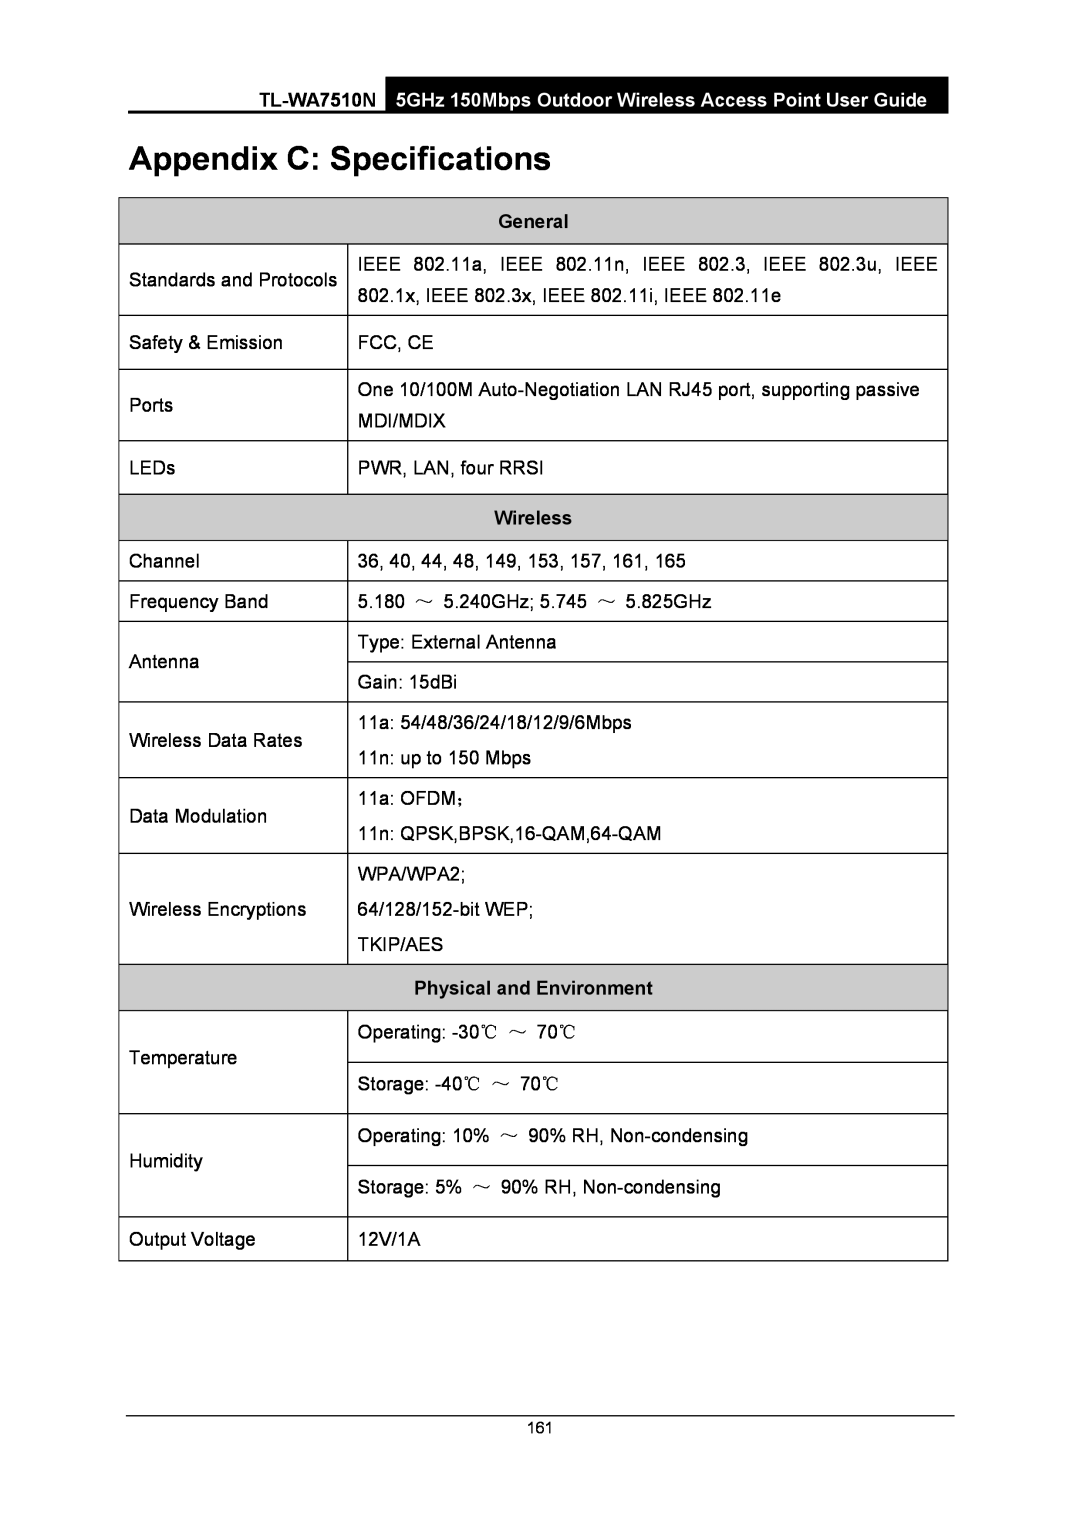 TP-Link manual Appendix C Specifications, TL-WA7510N 5GHz 150Mbps Outdoor Wireless Access Point User Guide, General 